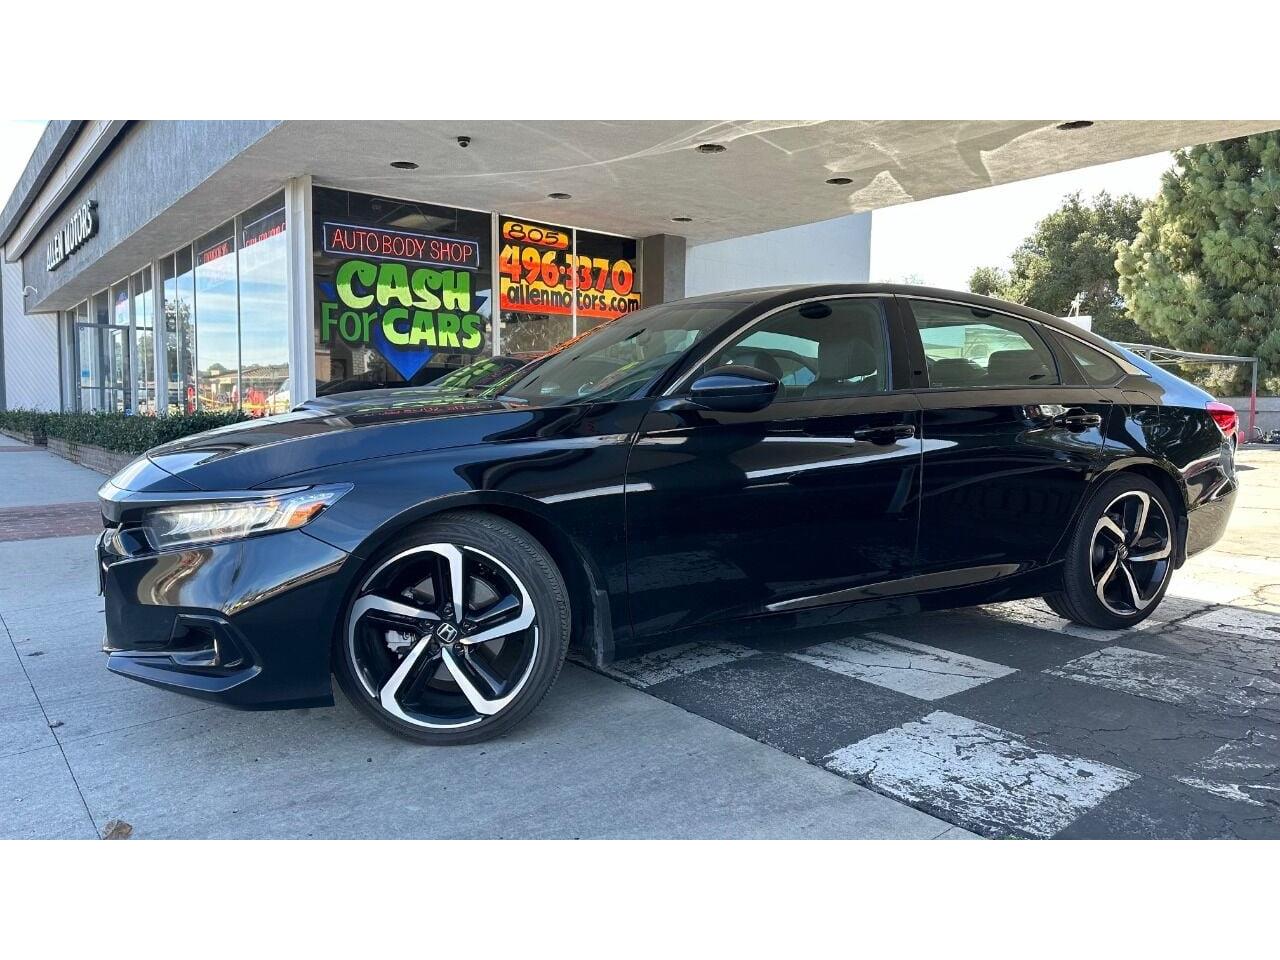 For Sale: 2021 Honda Accord in Thousand Oaks, California for sale in Thousand Oaks, CA